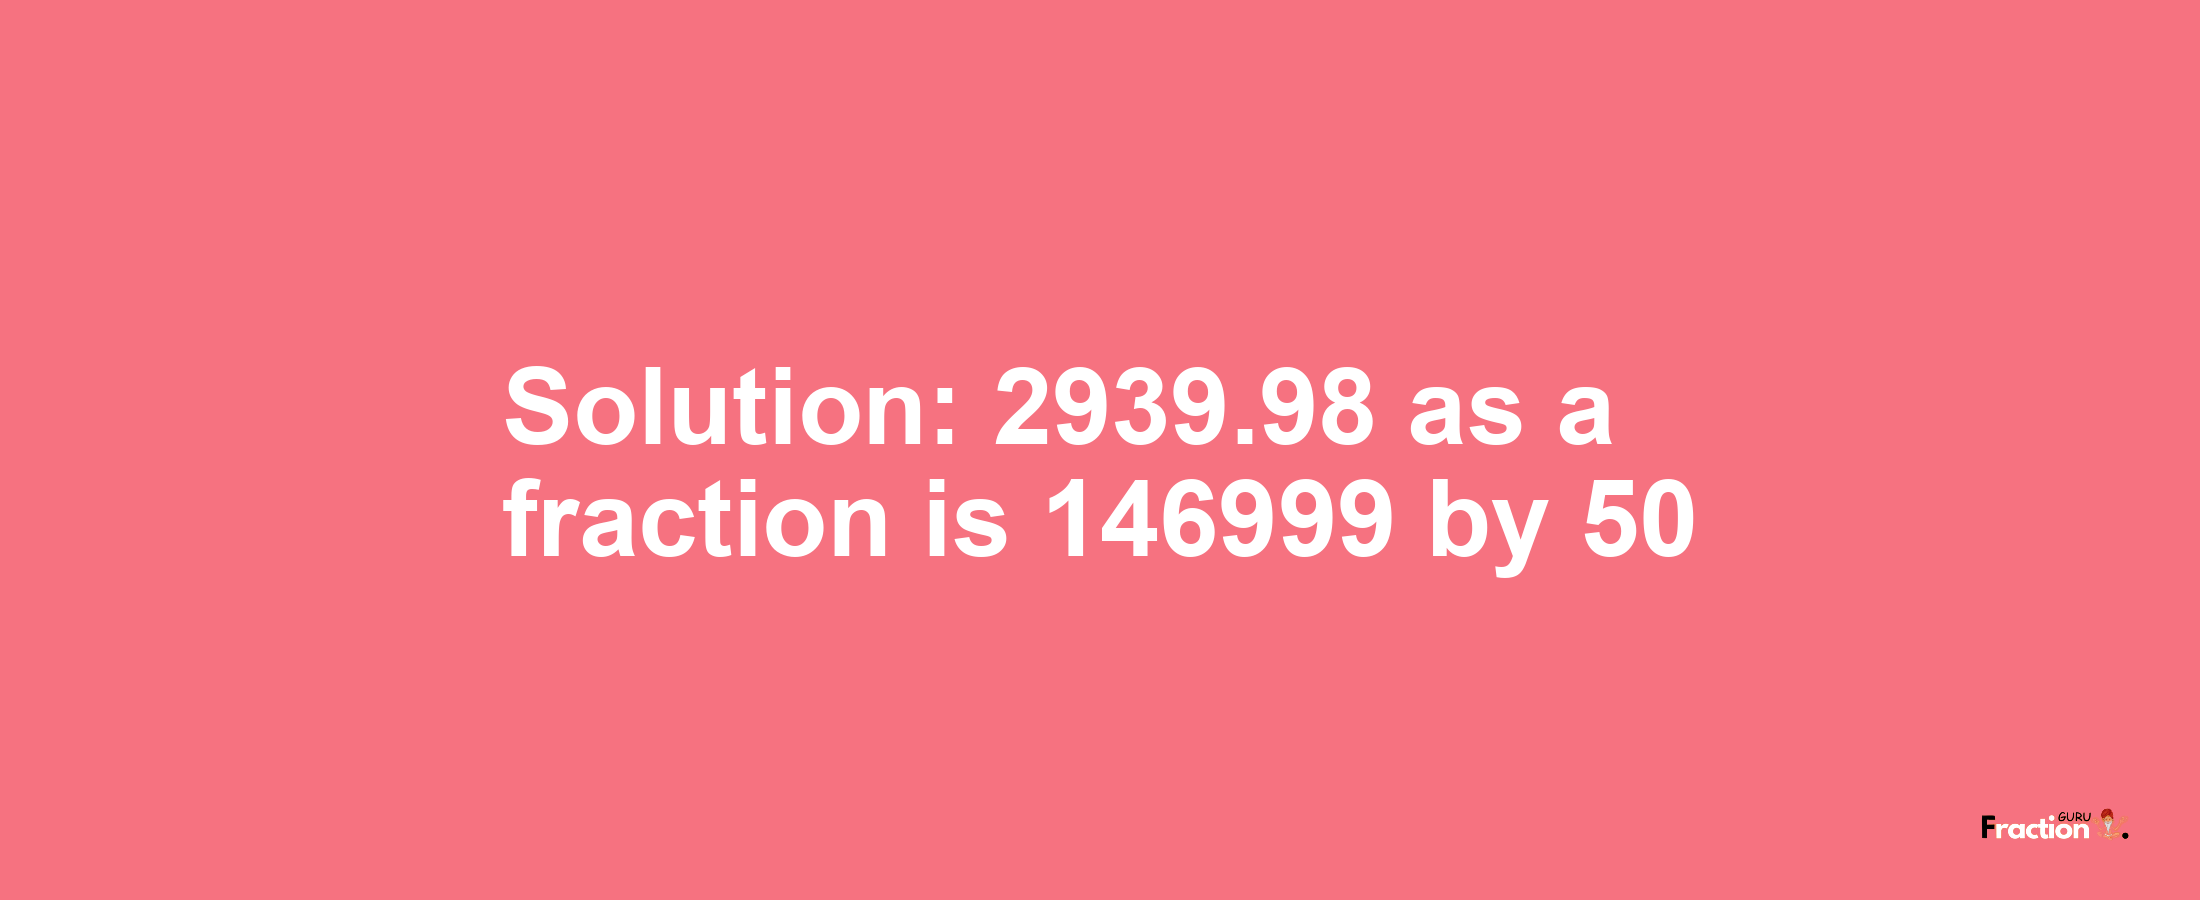 Solution:2939.98 as a fraction is 146999/50